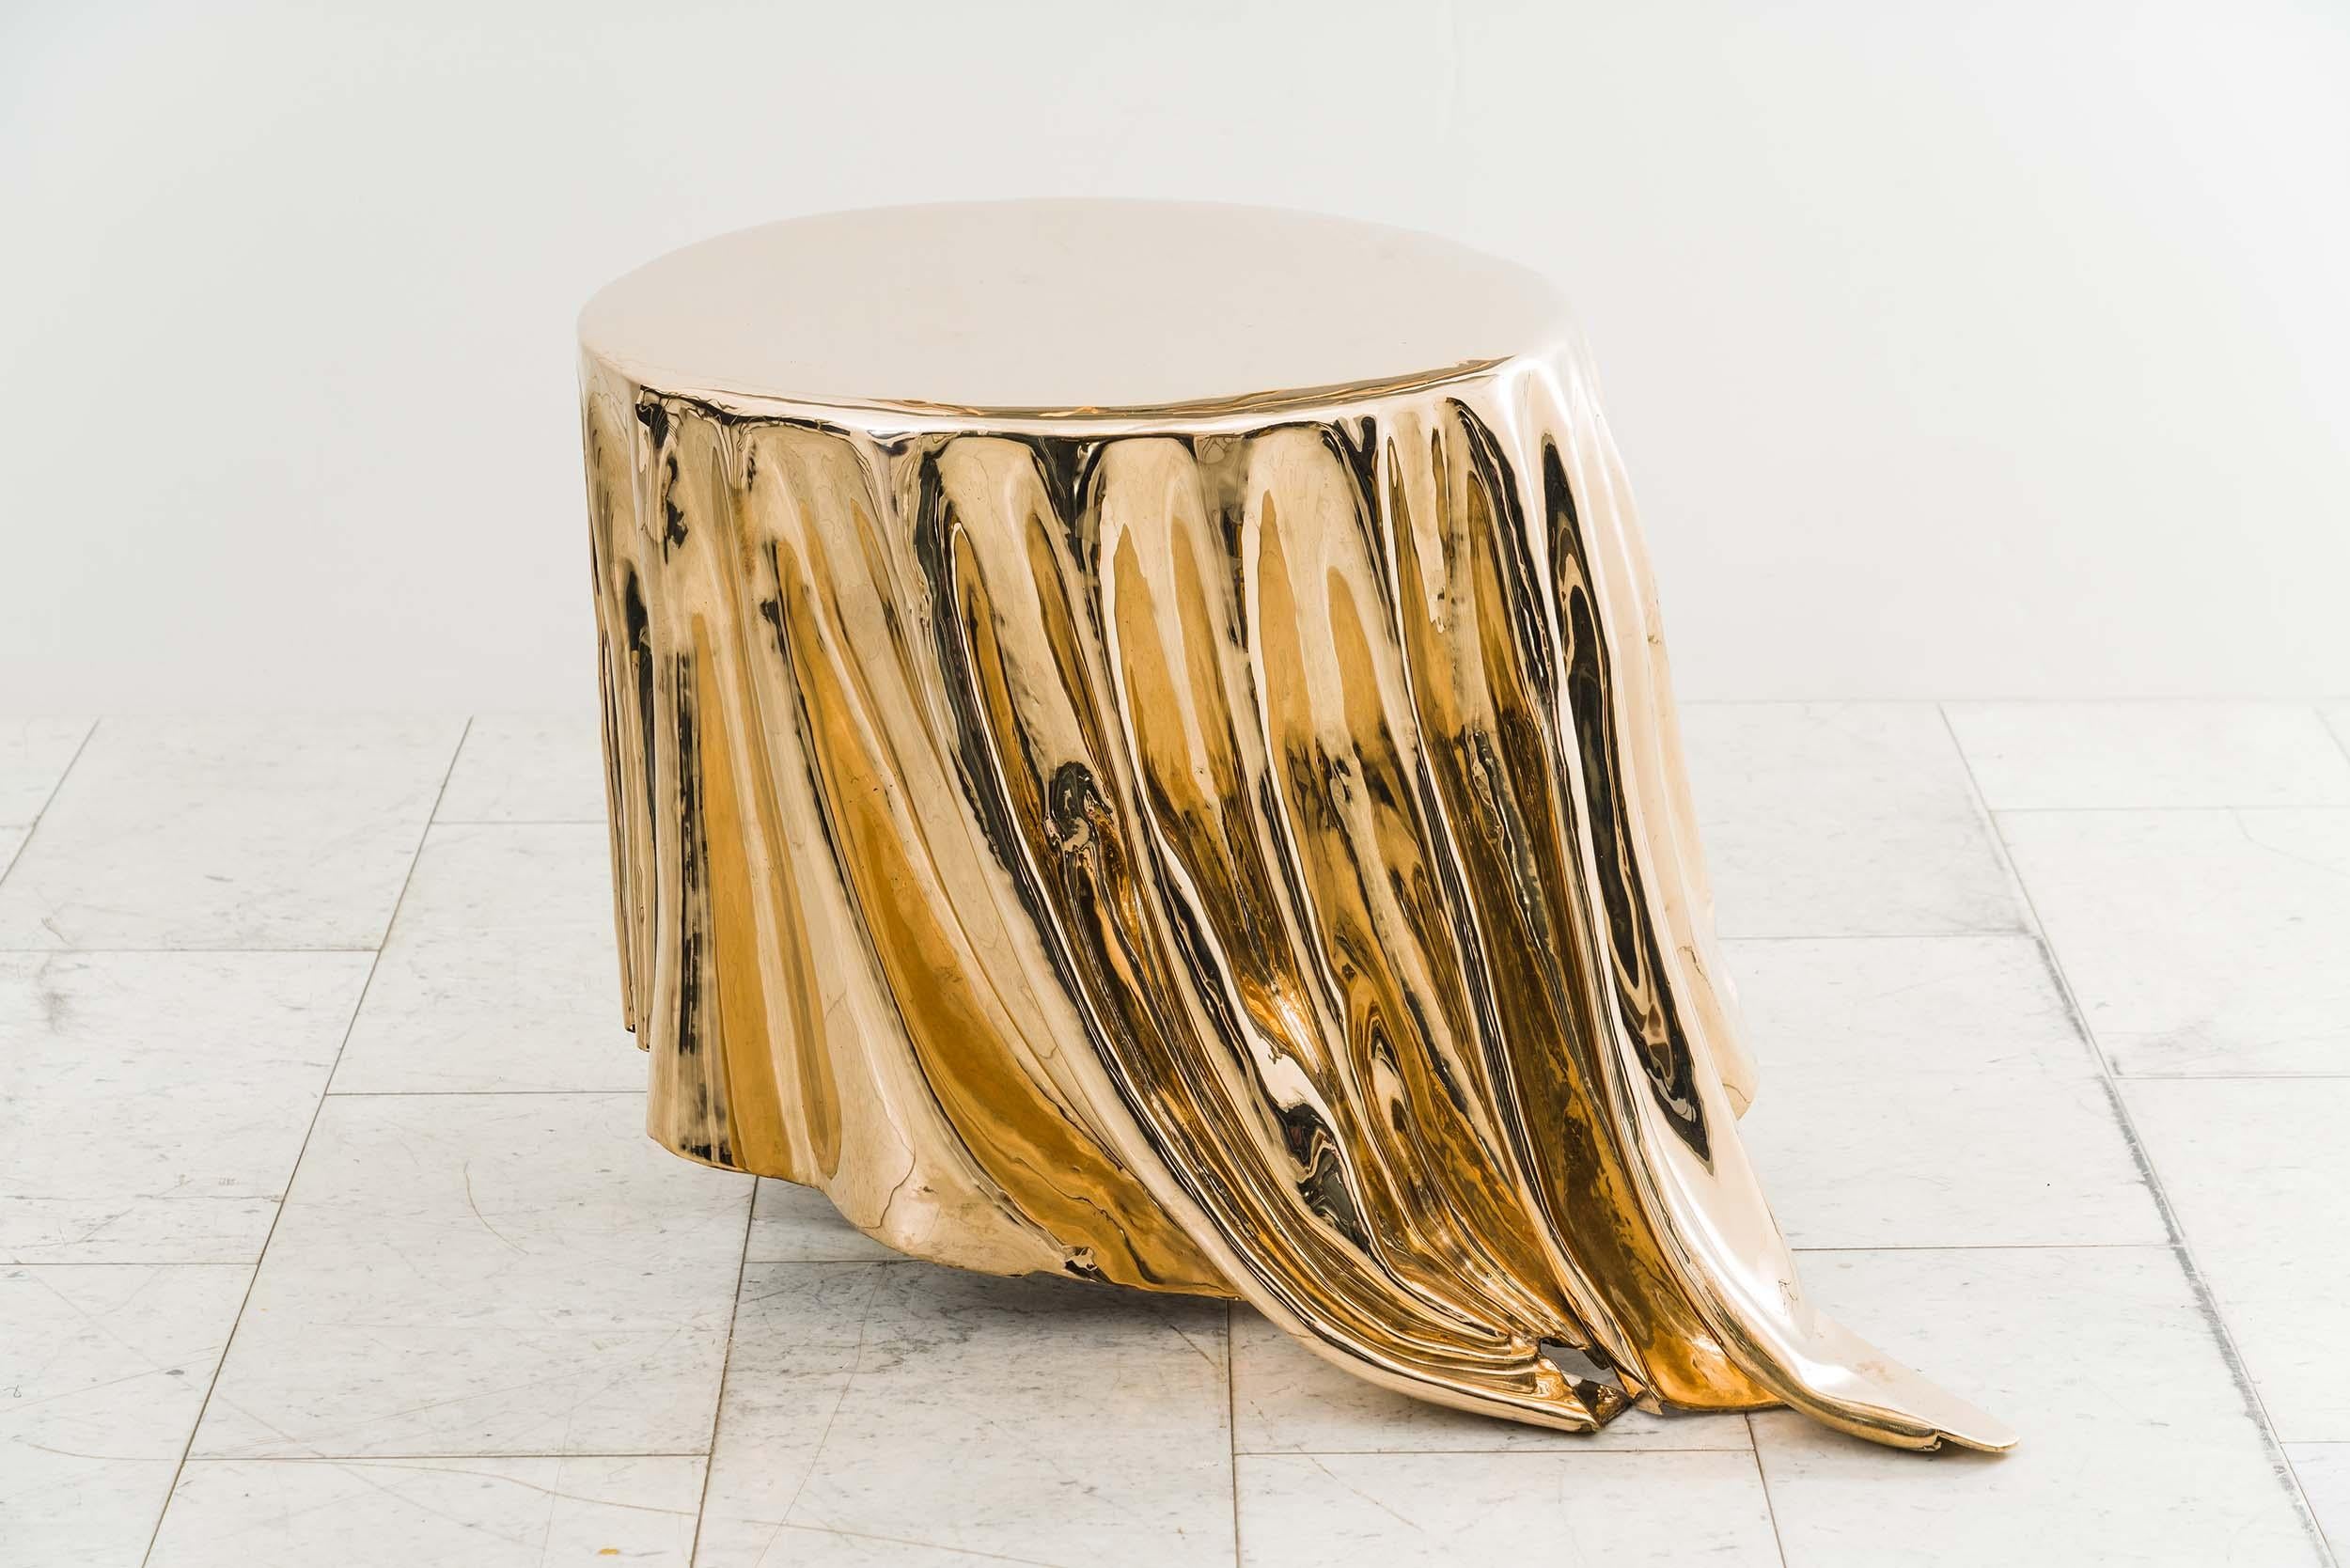 The Levitaz Side Table in cast bronze is a sculptural masterpiece that manifests fluidity and motion in a solid form. Through exquisite craftsmanship, bronze is transformed into a cascade of fluid lines, reminiscent of draped fabric frozen in time.